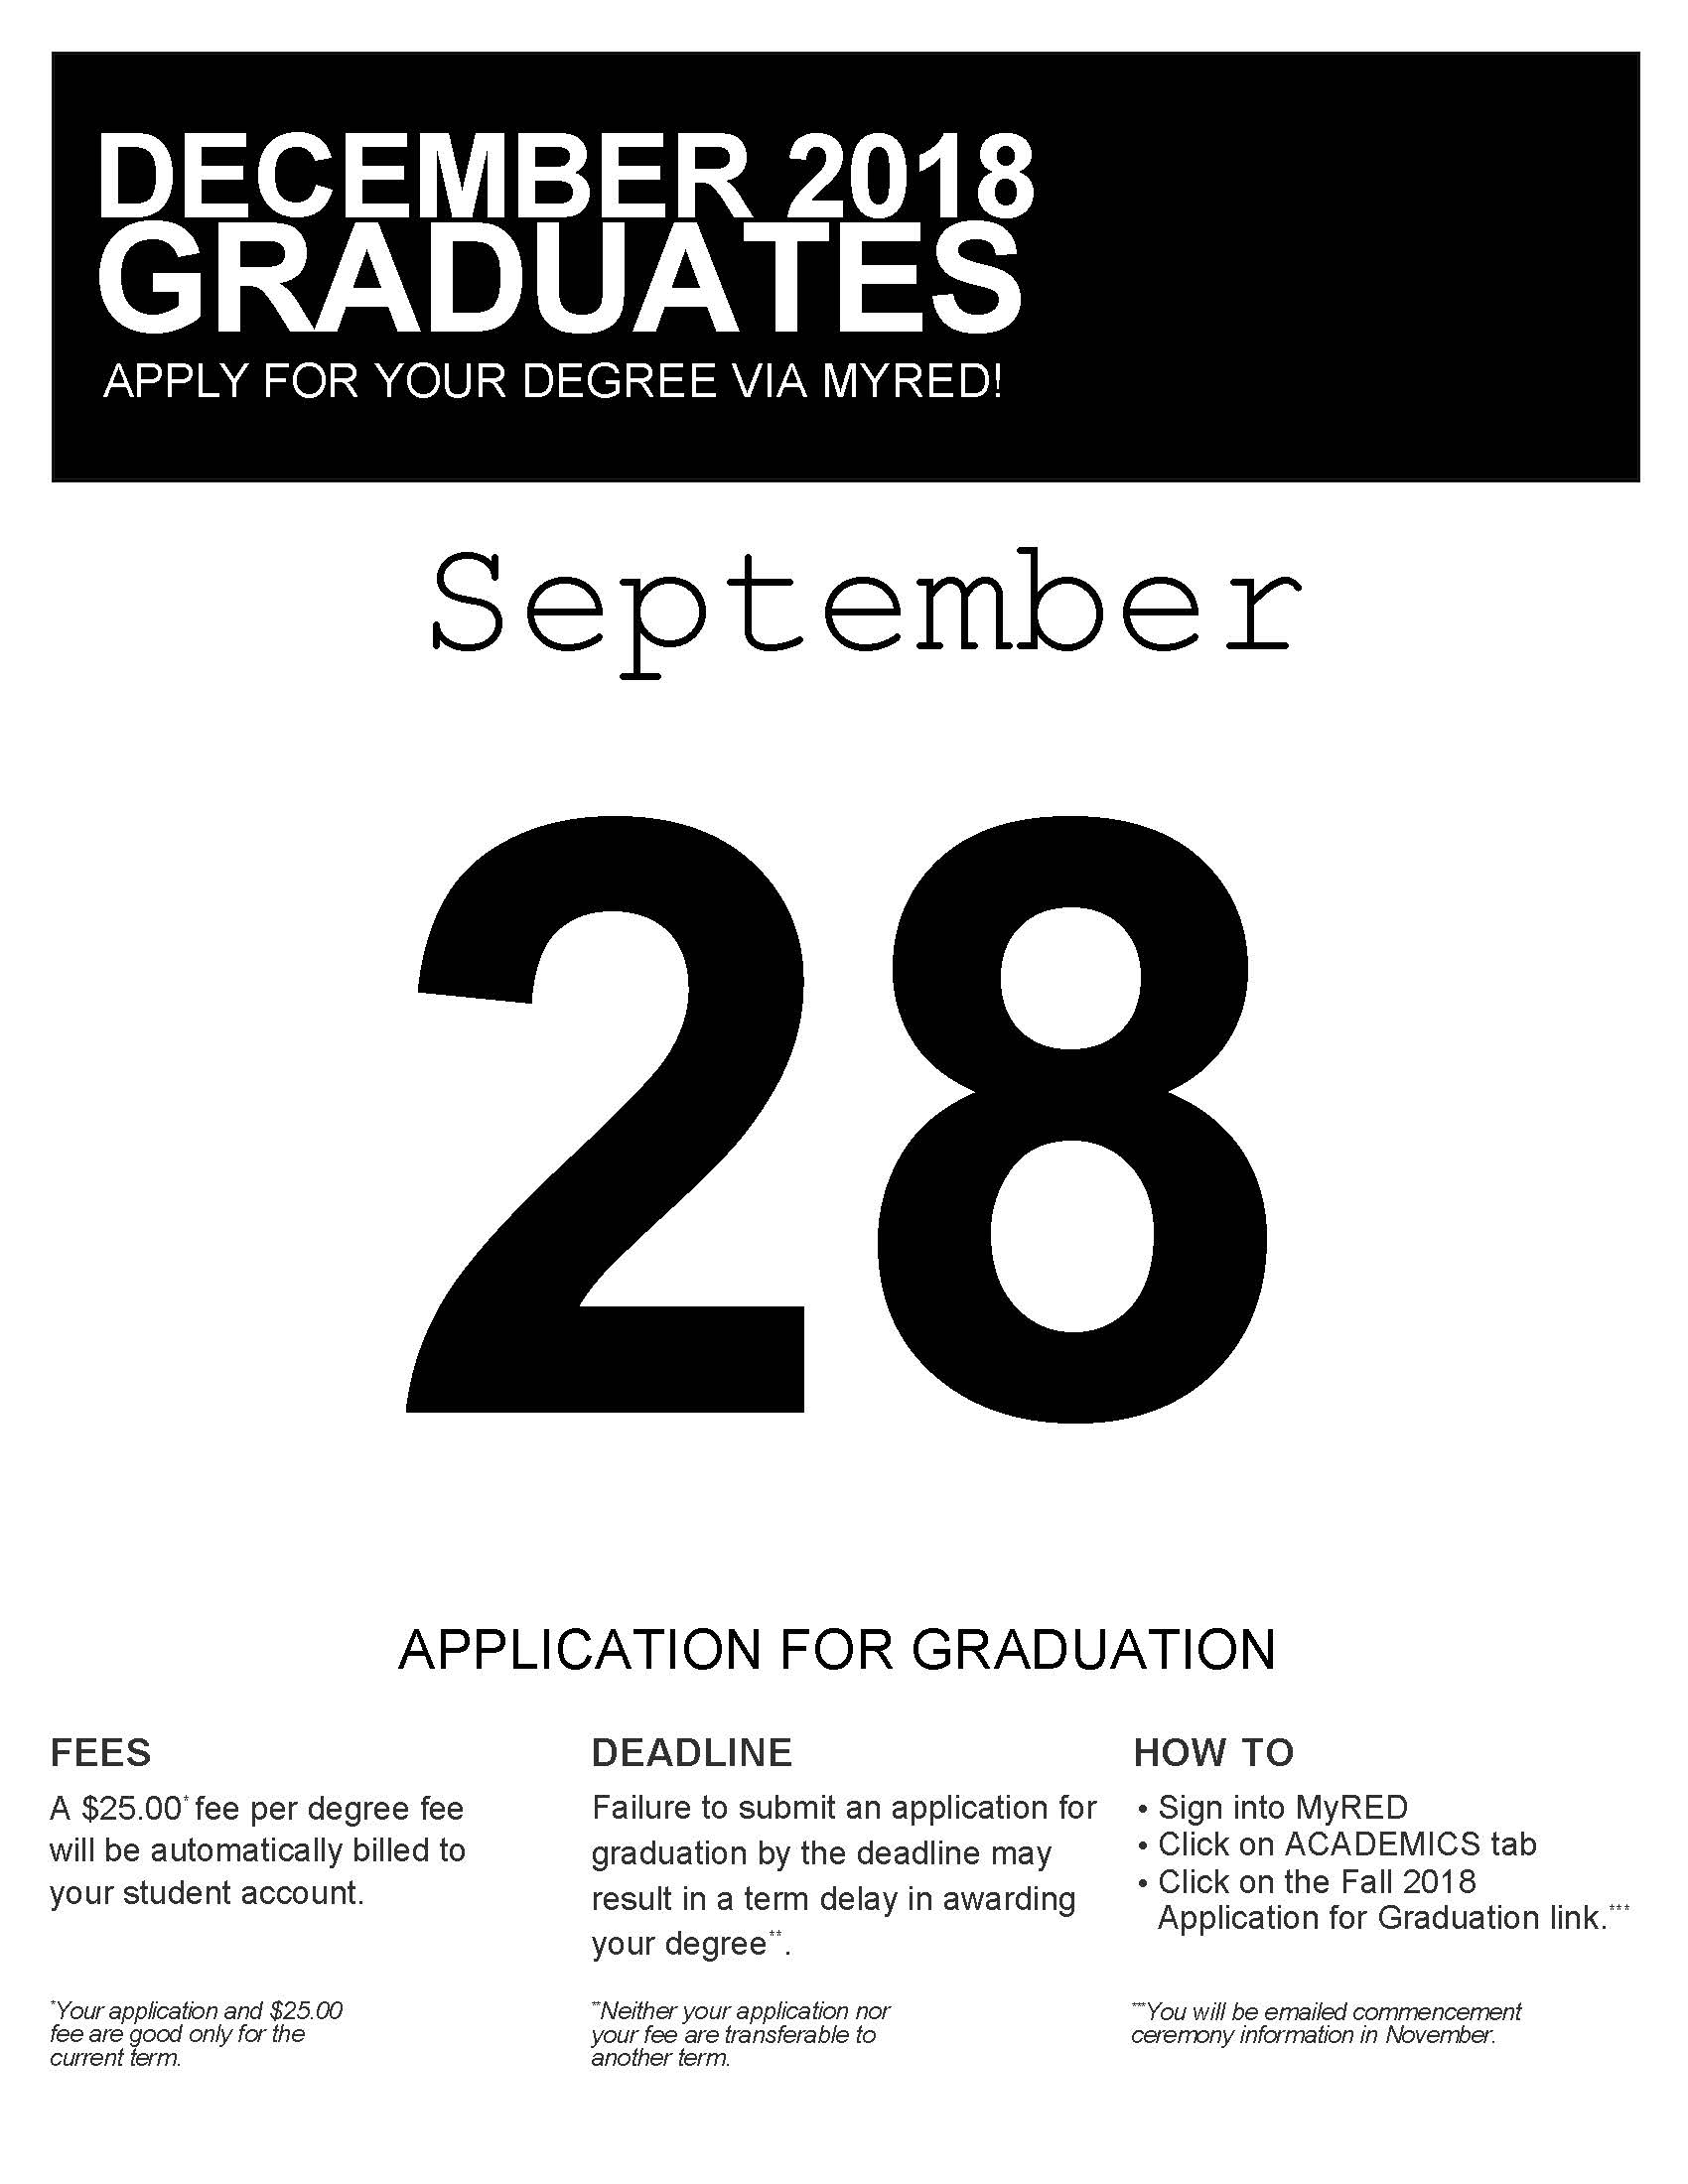 December Graduation Applications are due Friday